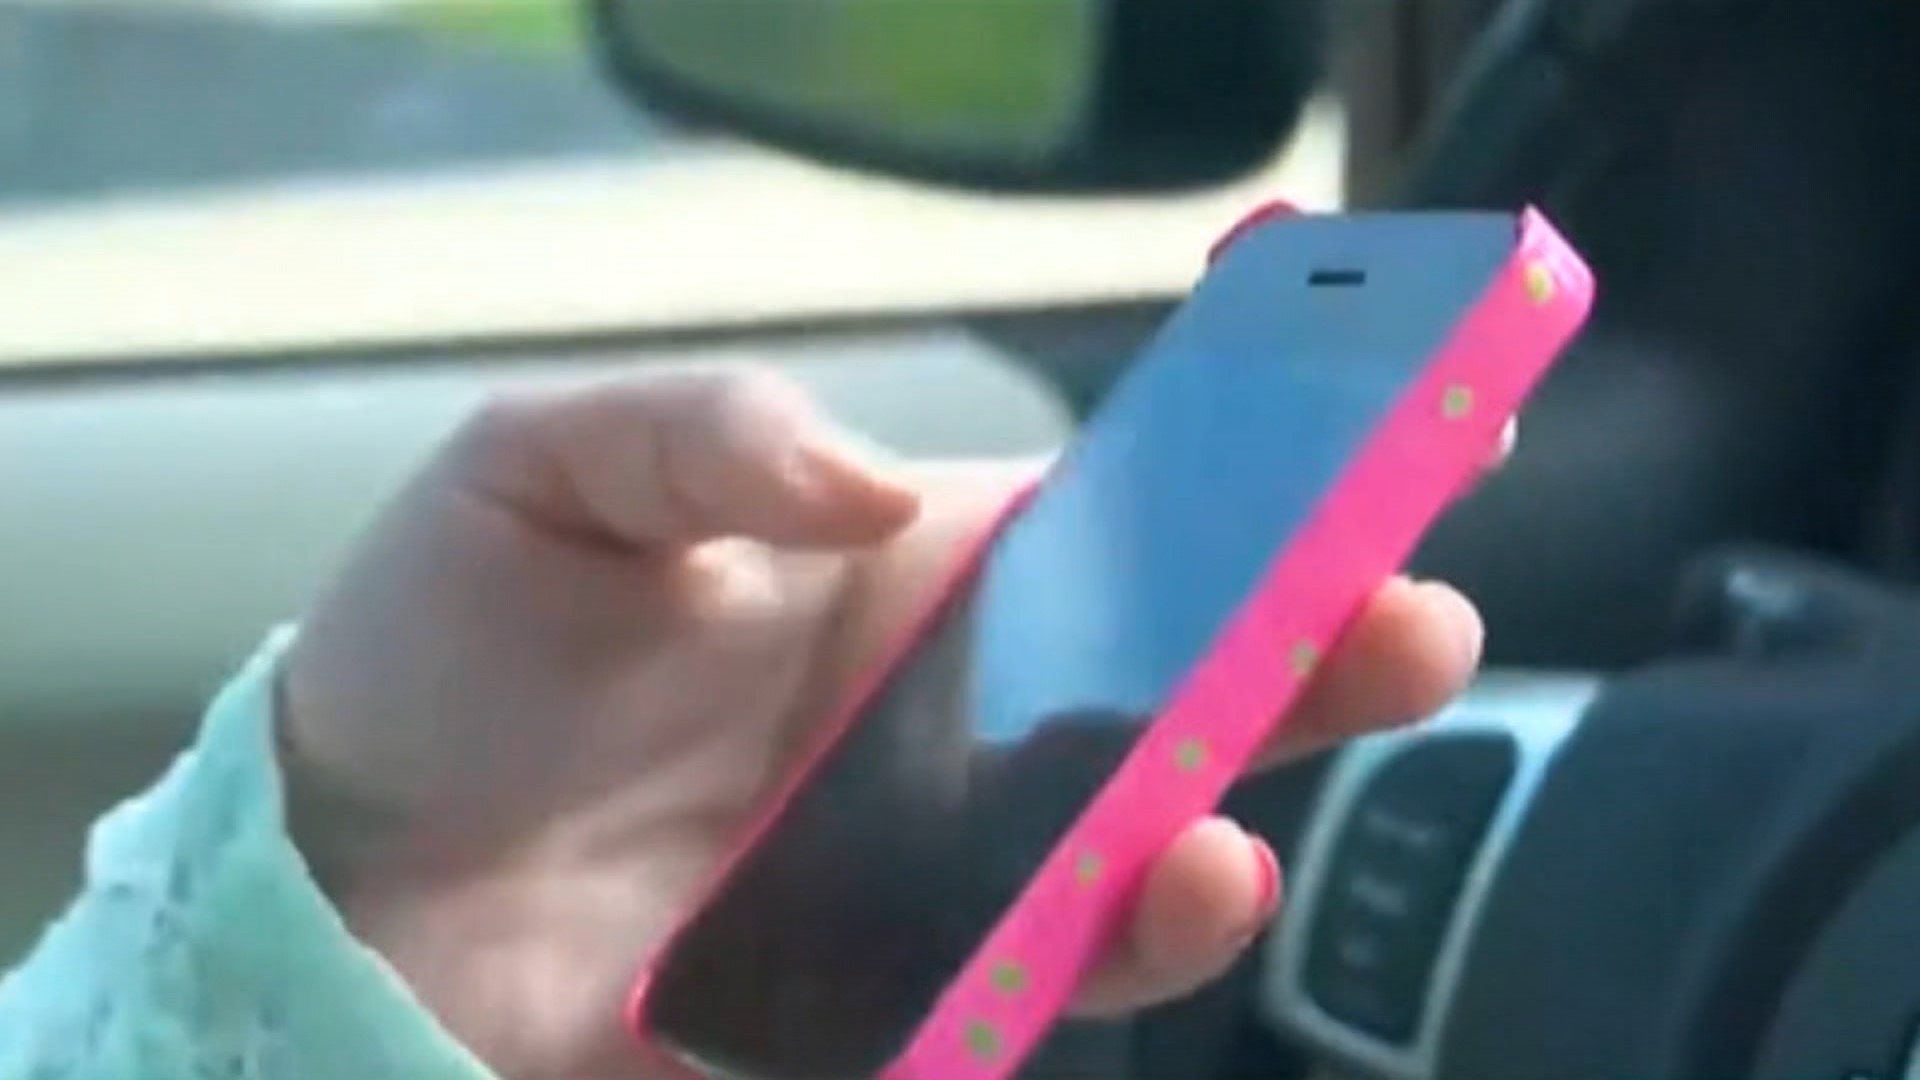 A newly-signed Alabama state law makes it illegal to hold a mobile device while operating a vehicle.